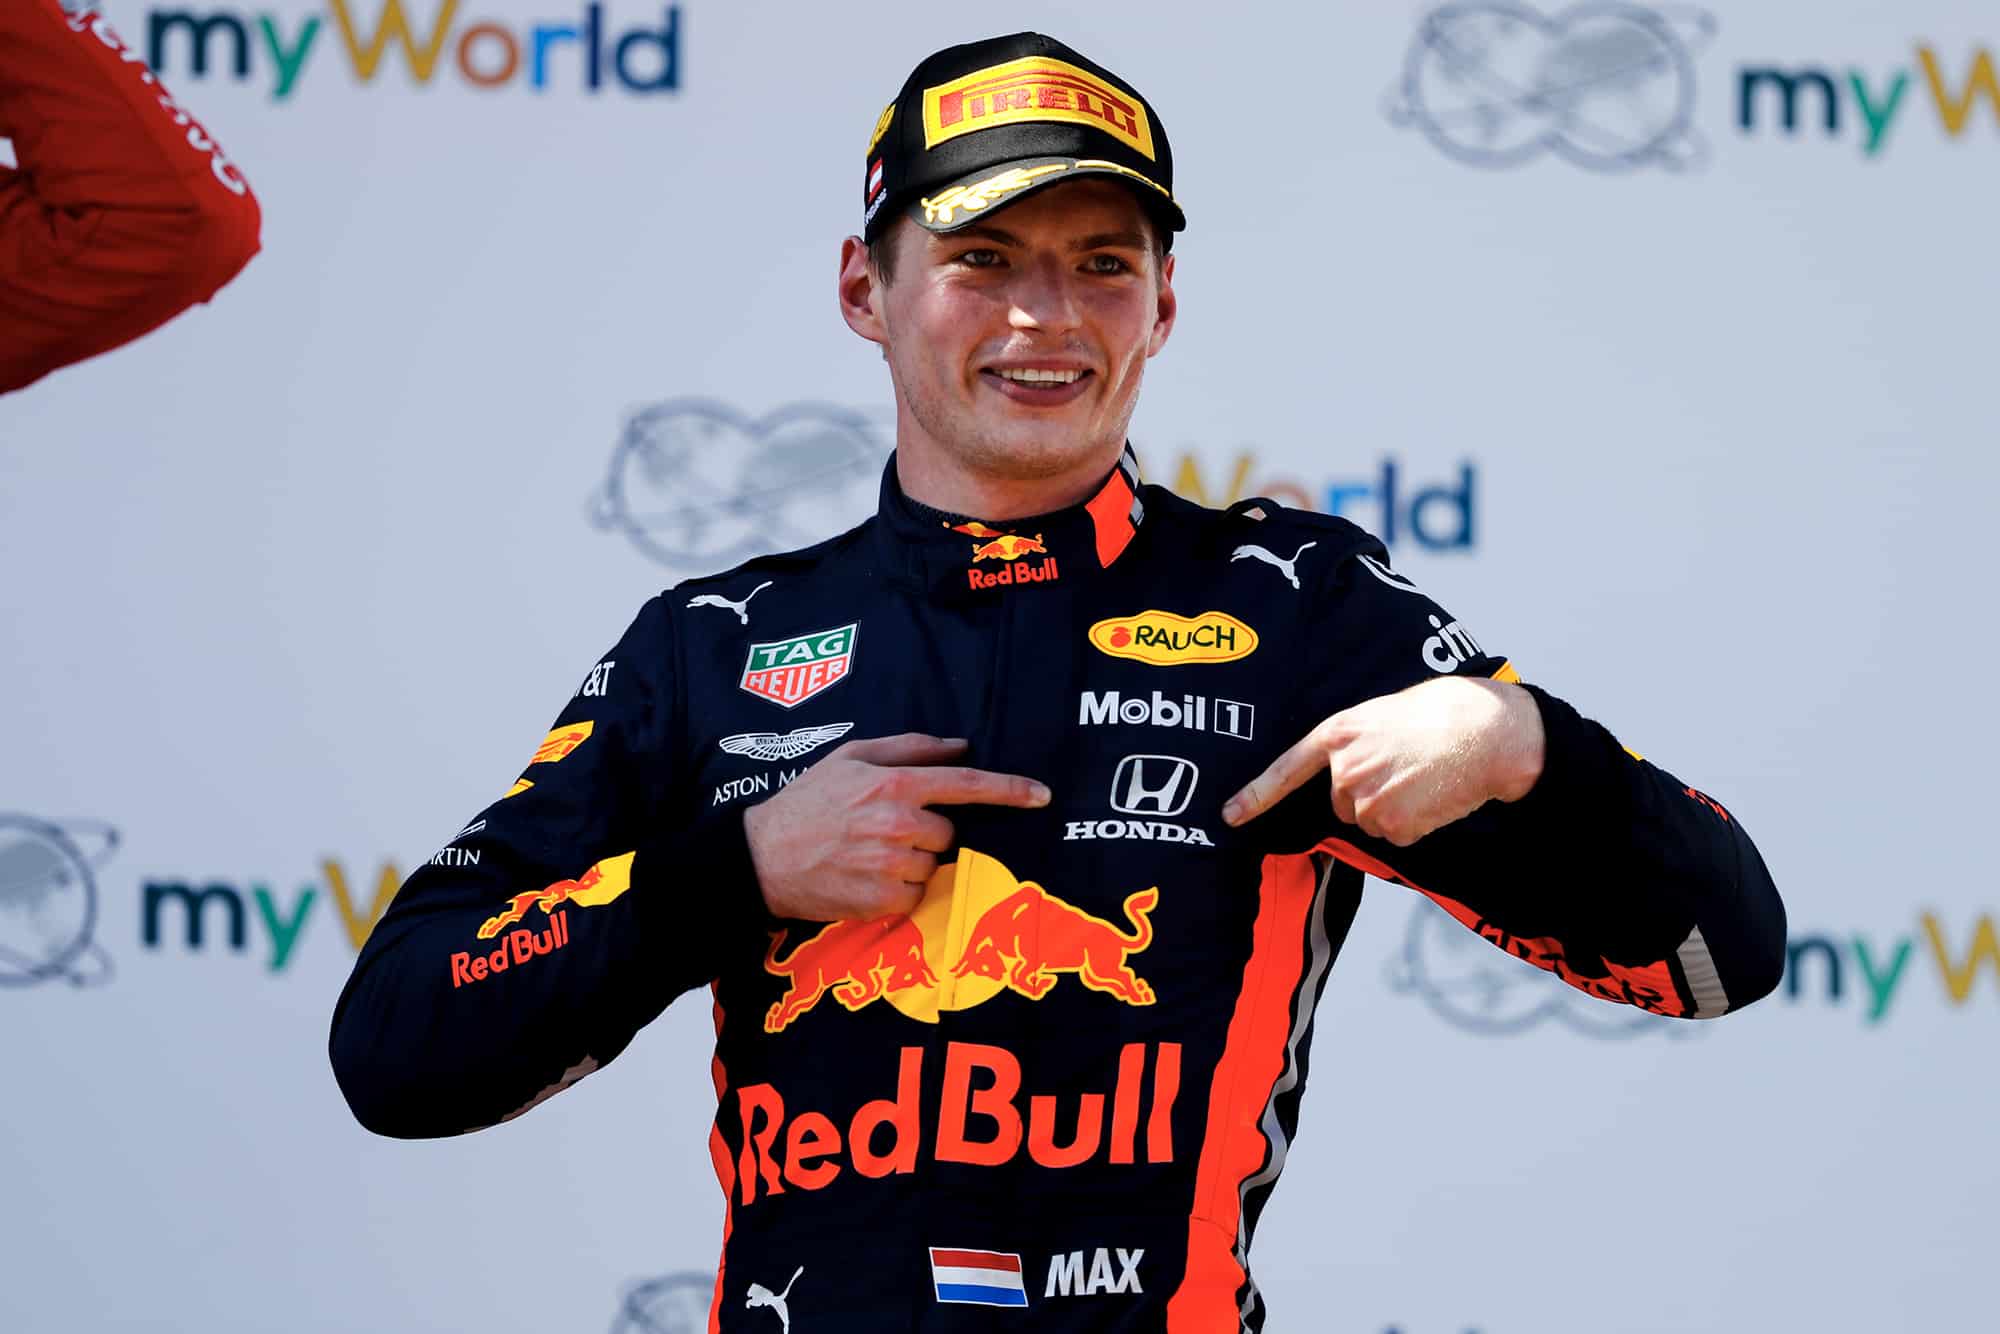 Max Verstappen points at his Honda badge after winning the 2019 Austrian Grand Prix